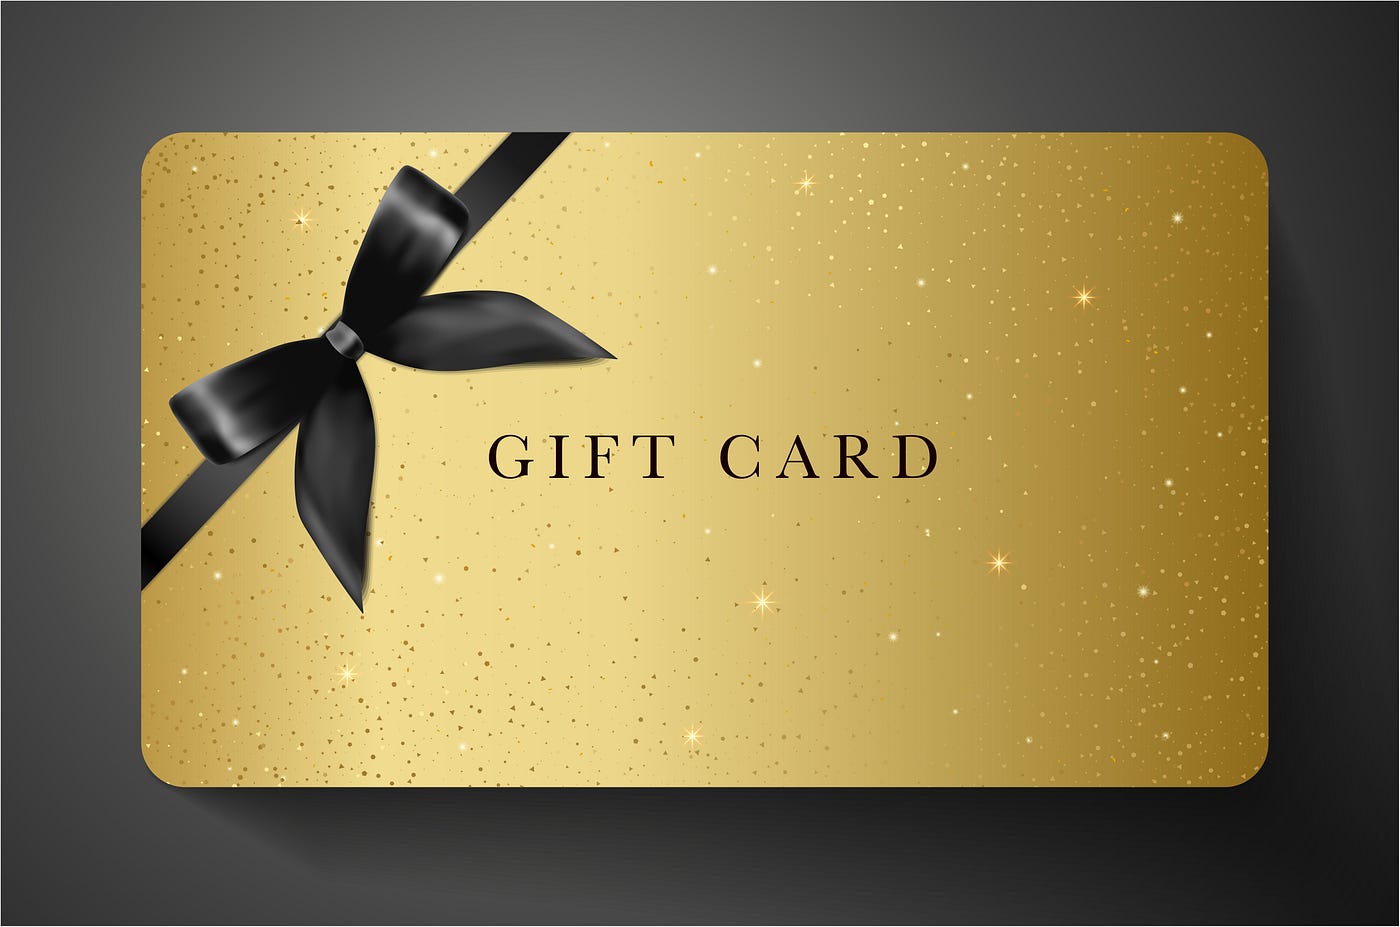 What To Do With Mistakenly Scratched Gift Card - Nosh